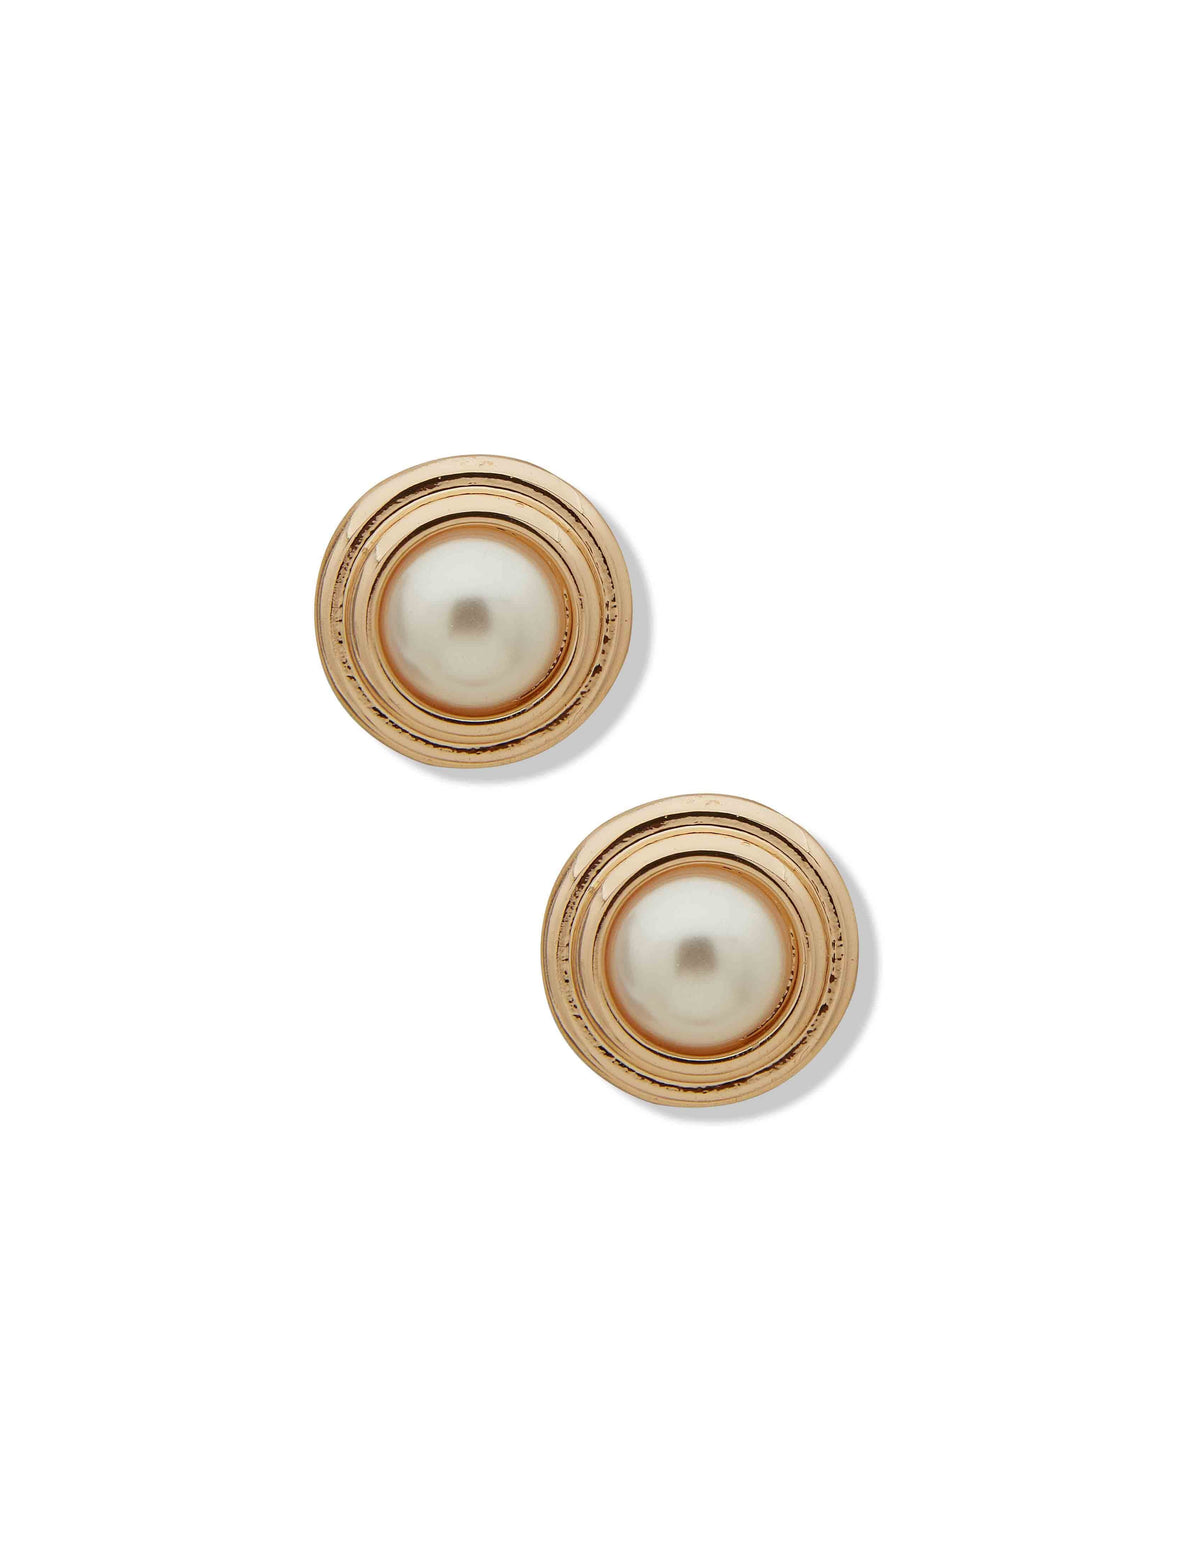 Anne Klein Gold Tone Gold-Tone Faux Pearl Cabochon Stud Earrings